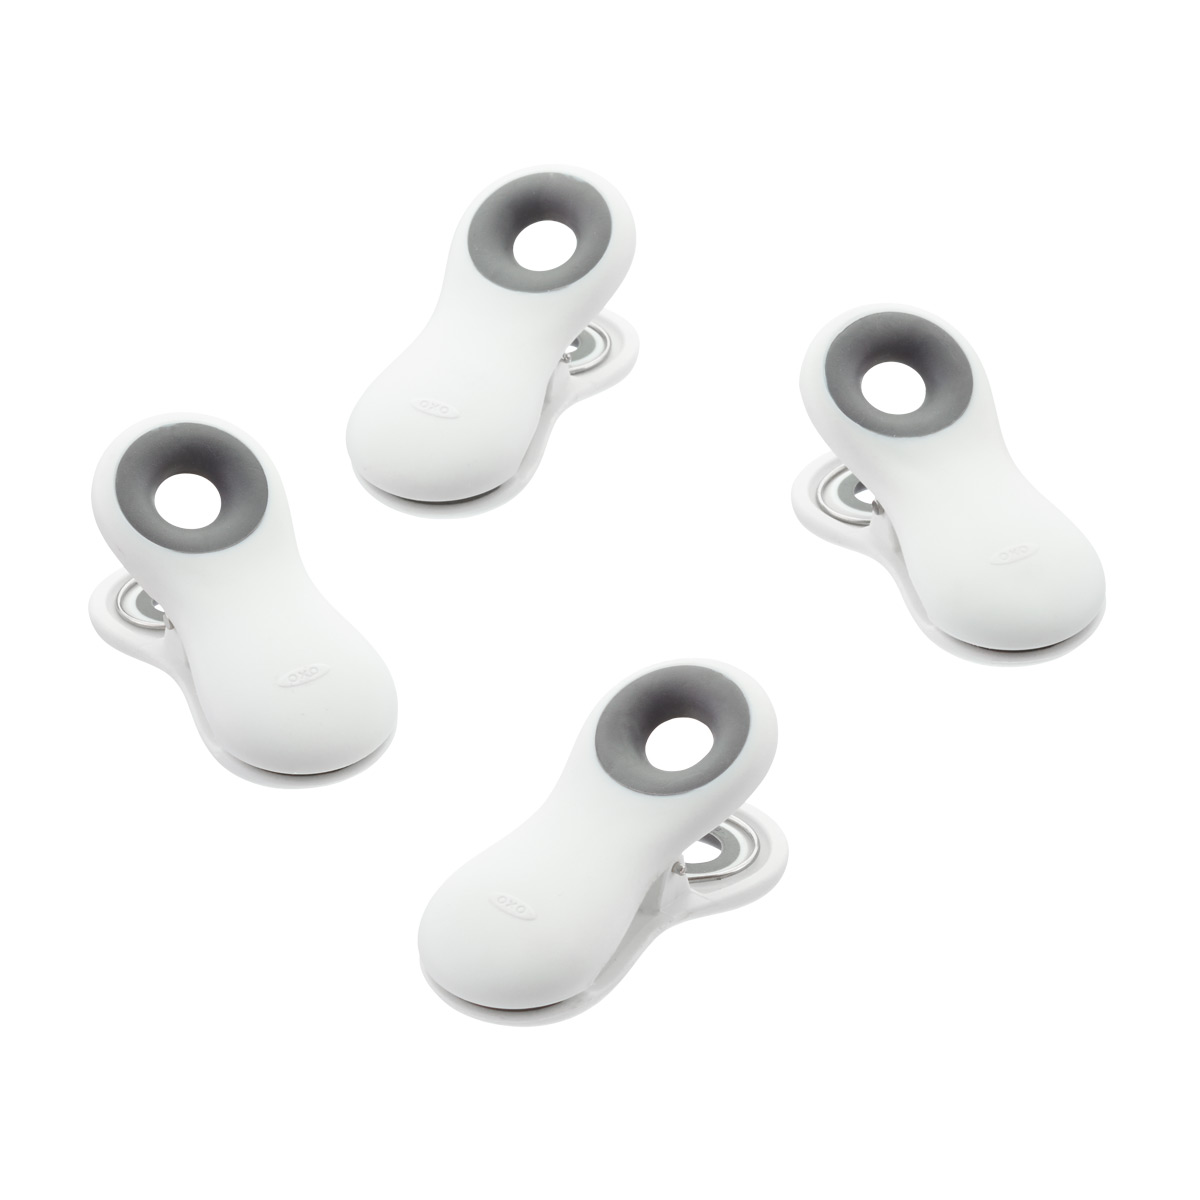 New OXO Good Grips Magnetic Clips and Bag Cinches - Set of 9